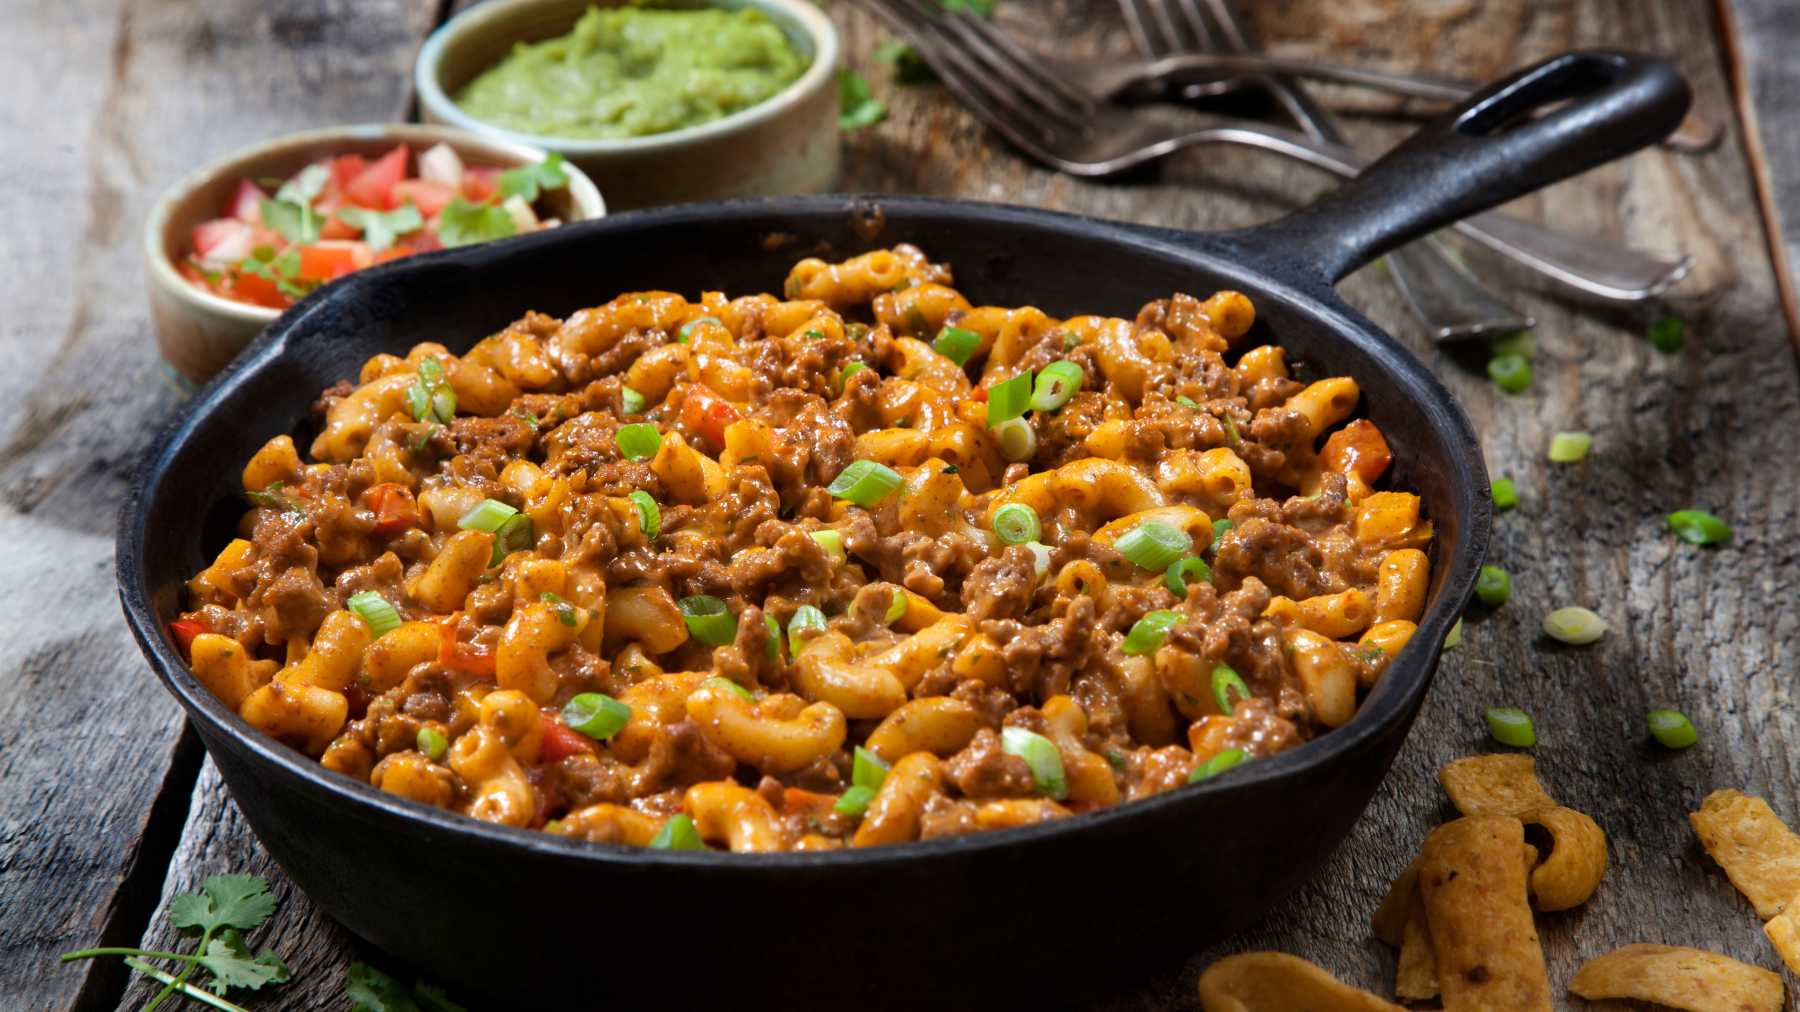 15 Easy ground beef dinner recipes for quick weeknight meals | MamasLatinas.com